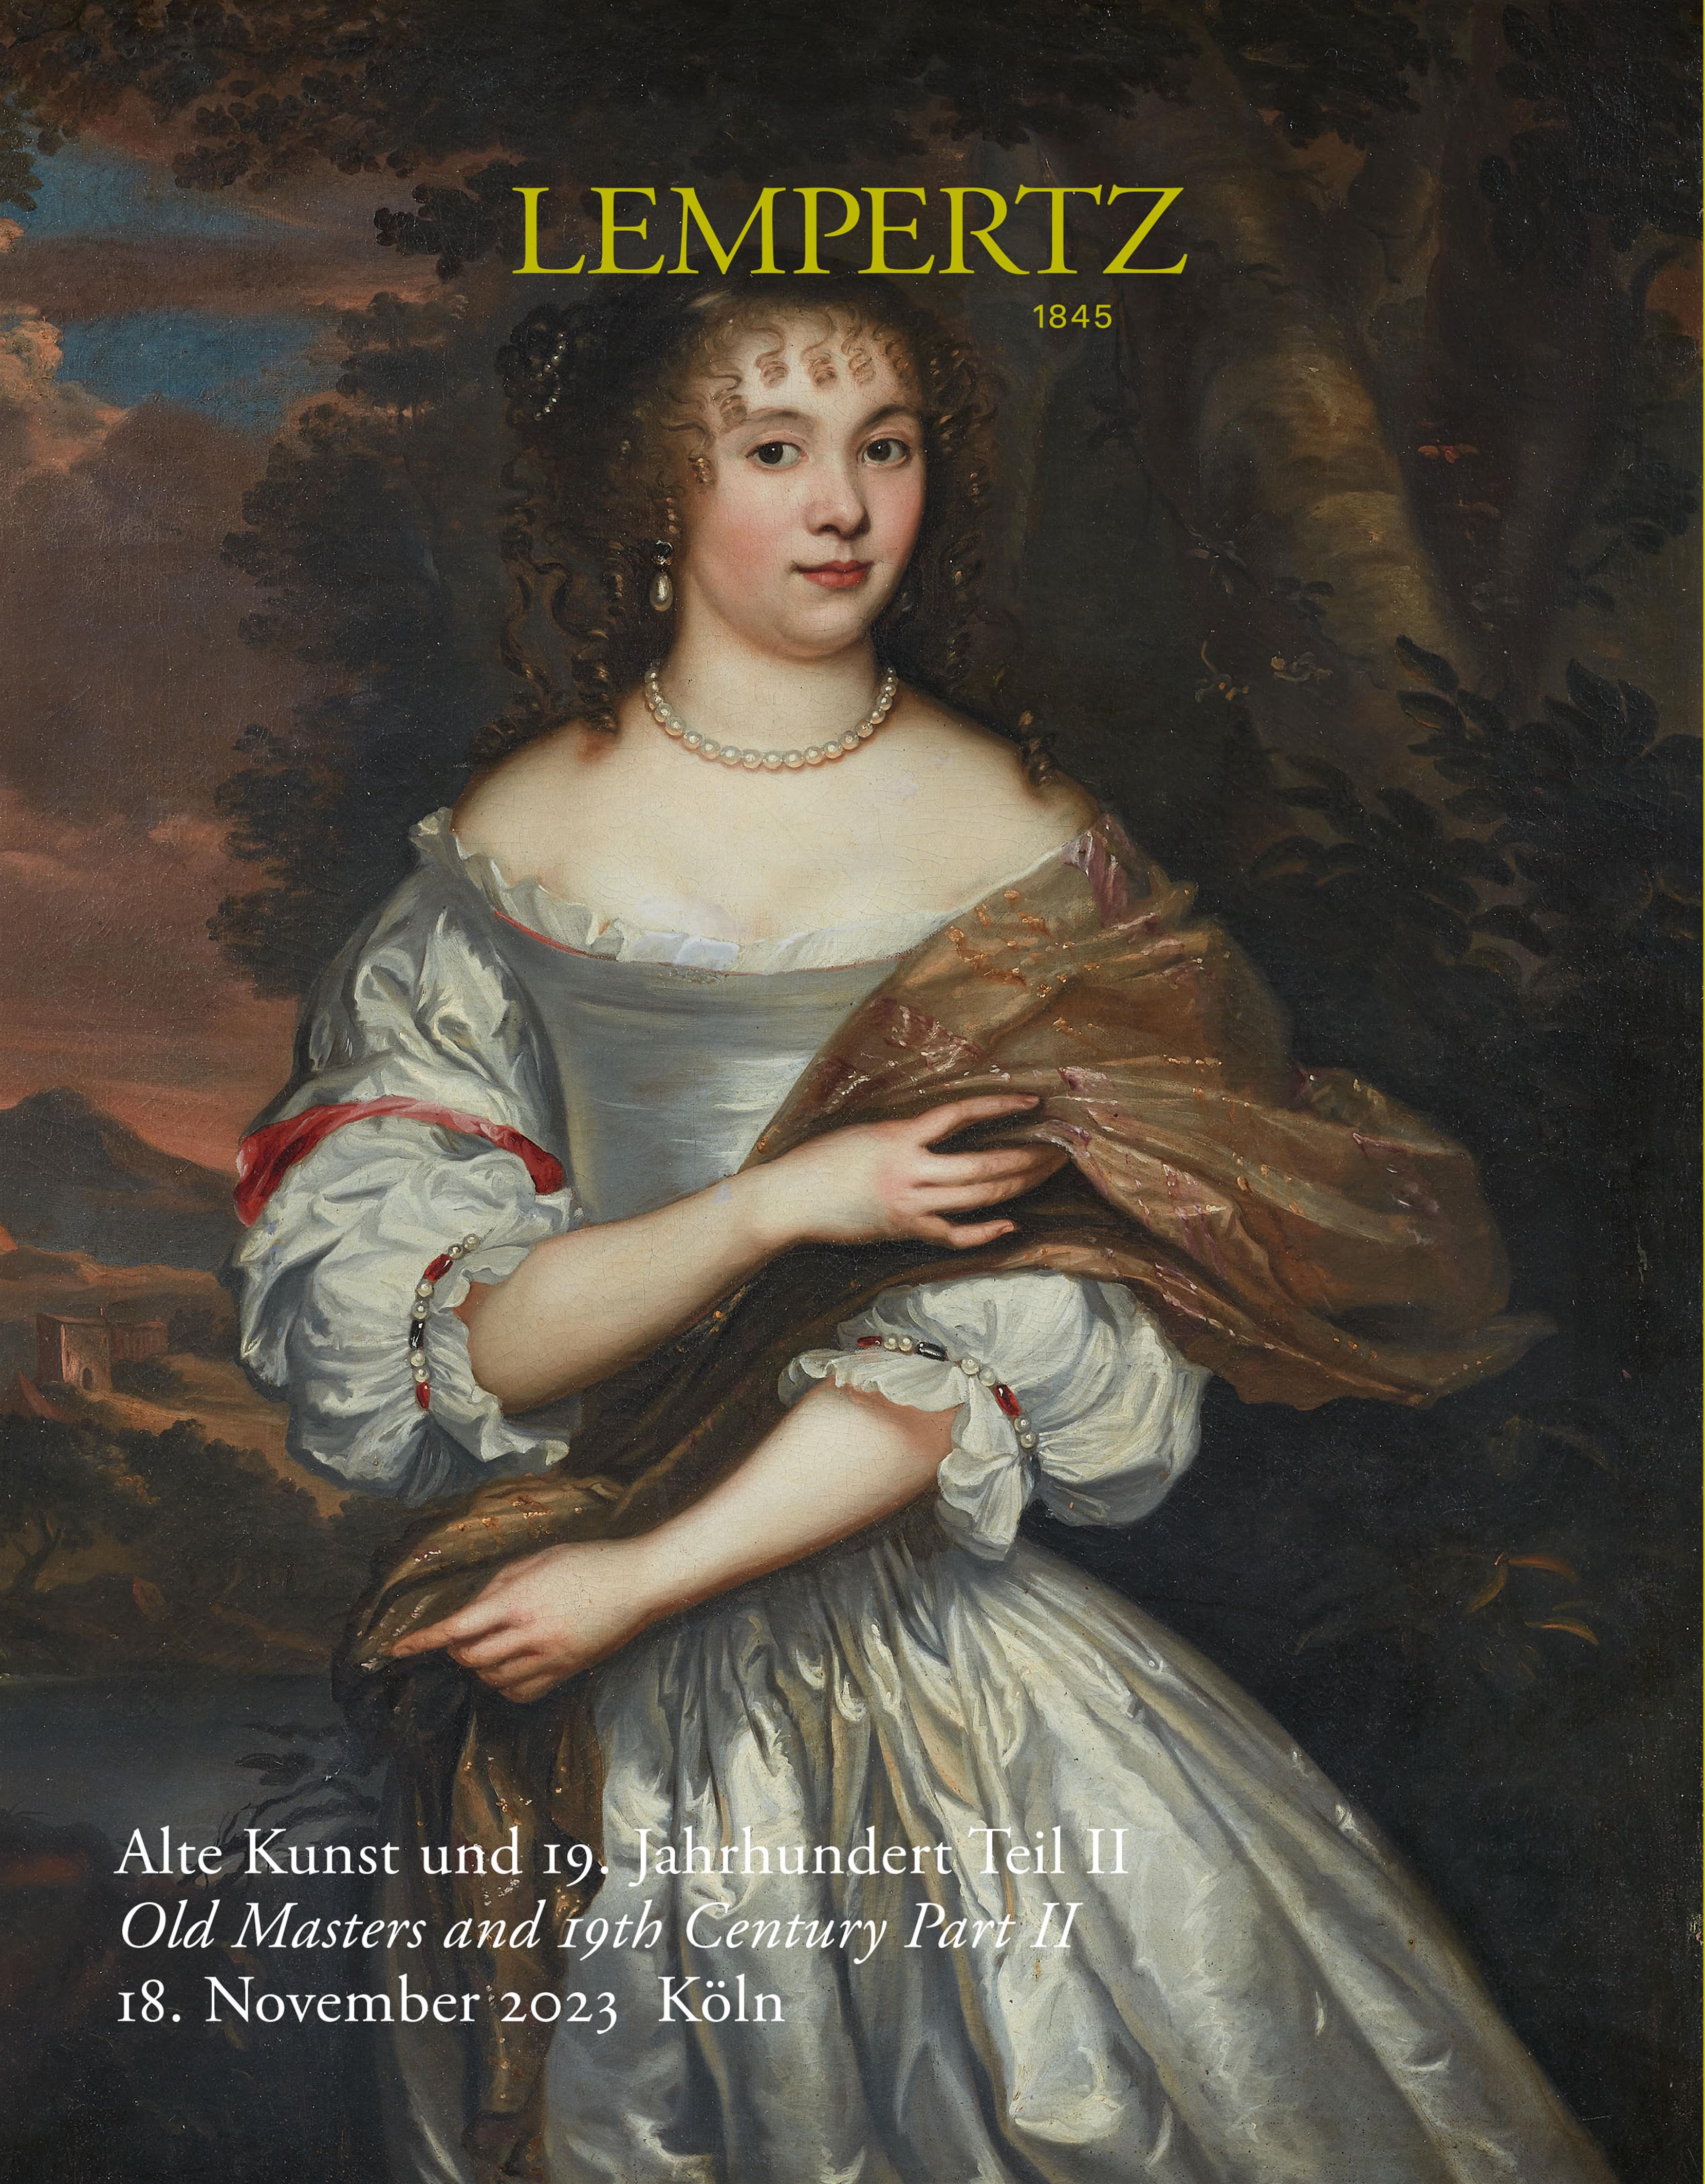 Catalogue - Old Masters and 19th Century, Part II - Online Catalogue - Auction 1231 – Purchase valuable works of art at the next Lempertz-Auction!